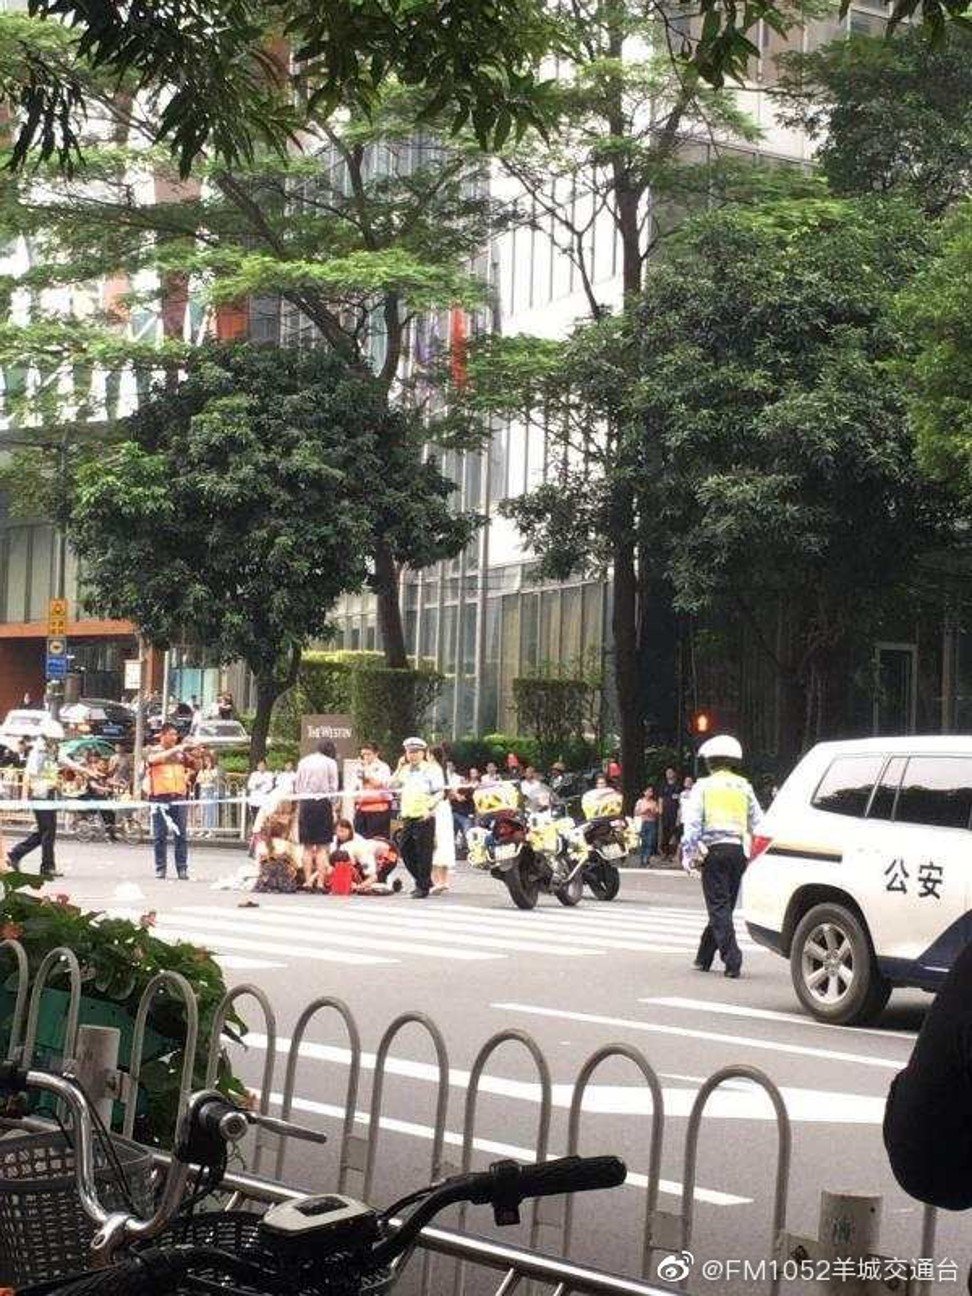 Police attend the scene after the incident on Tuesday morning. Photo: Weibo